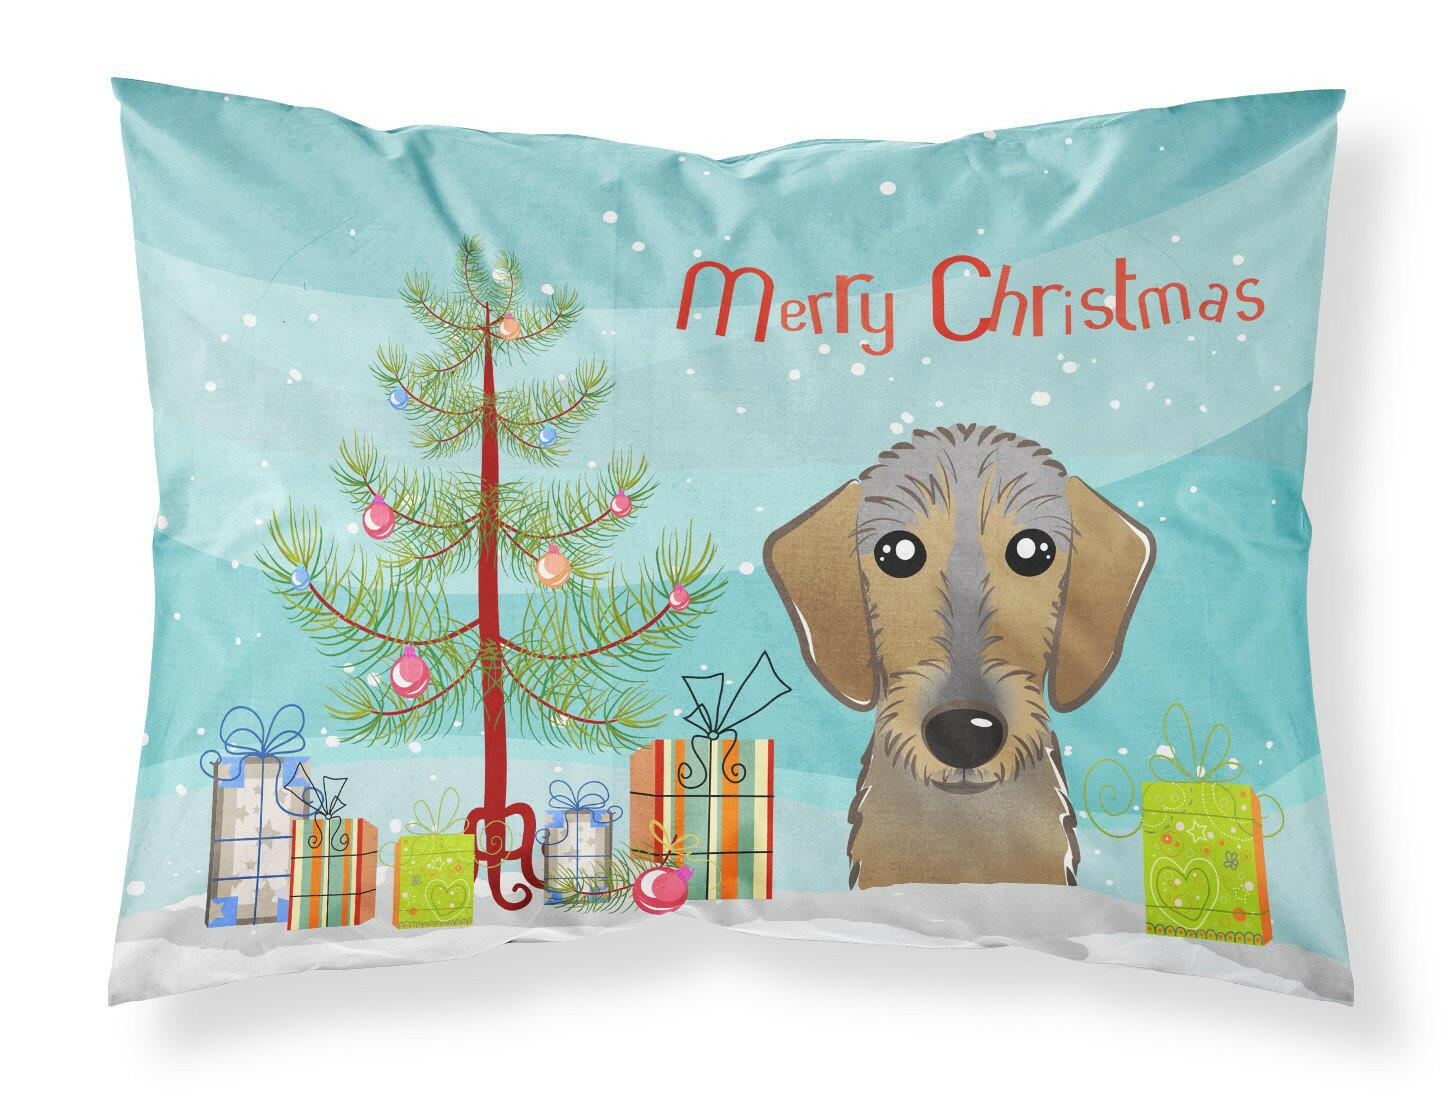 Christmas Tree and Wirehaired Dachshund Fabric Standard Pillowcase BB1605PILLOWCASE by Caroline's Treasures